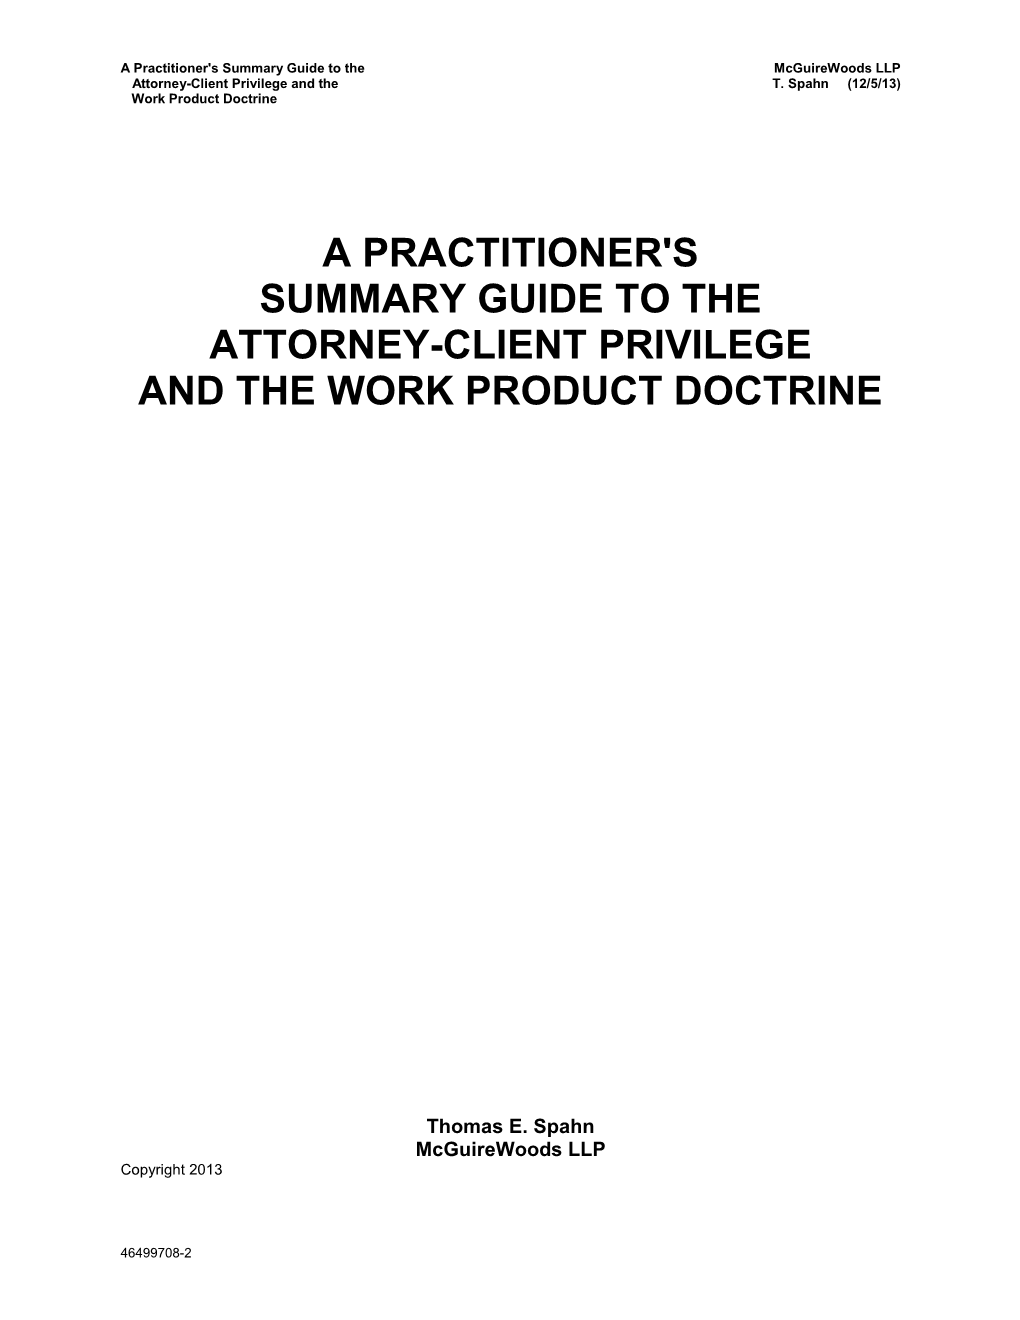 A Practitioner's Summary Guide to the Attorney-Client Privilege and the Work Product Doctrine